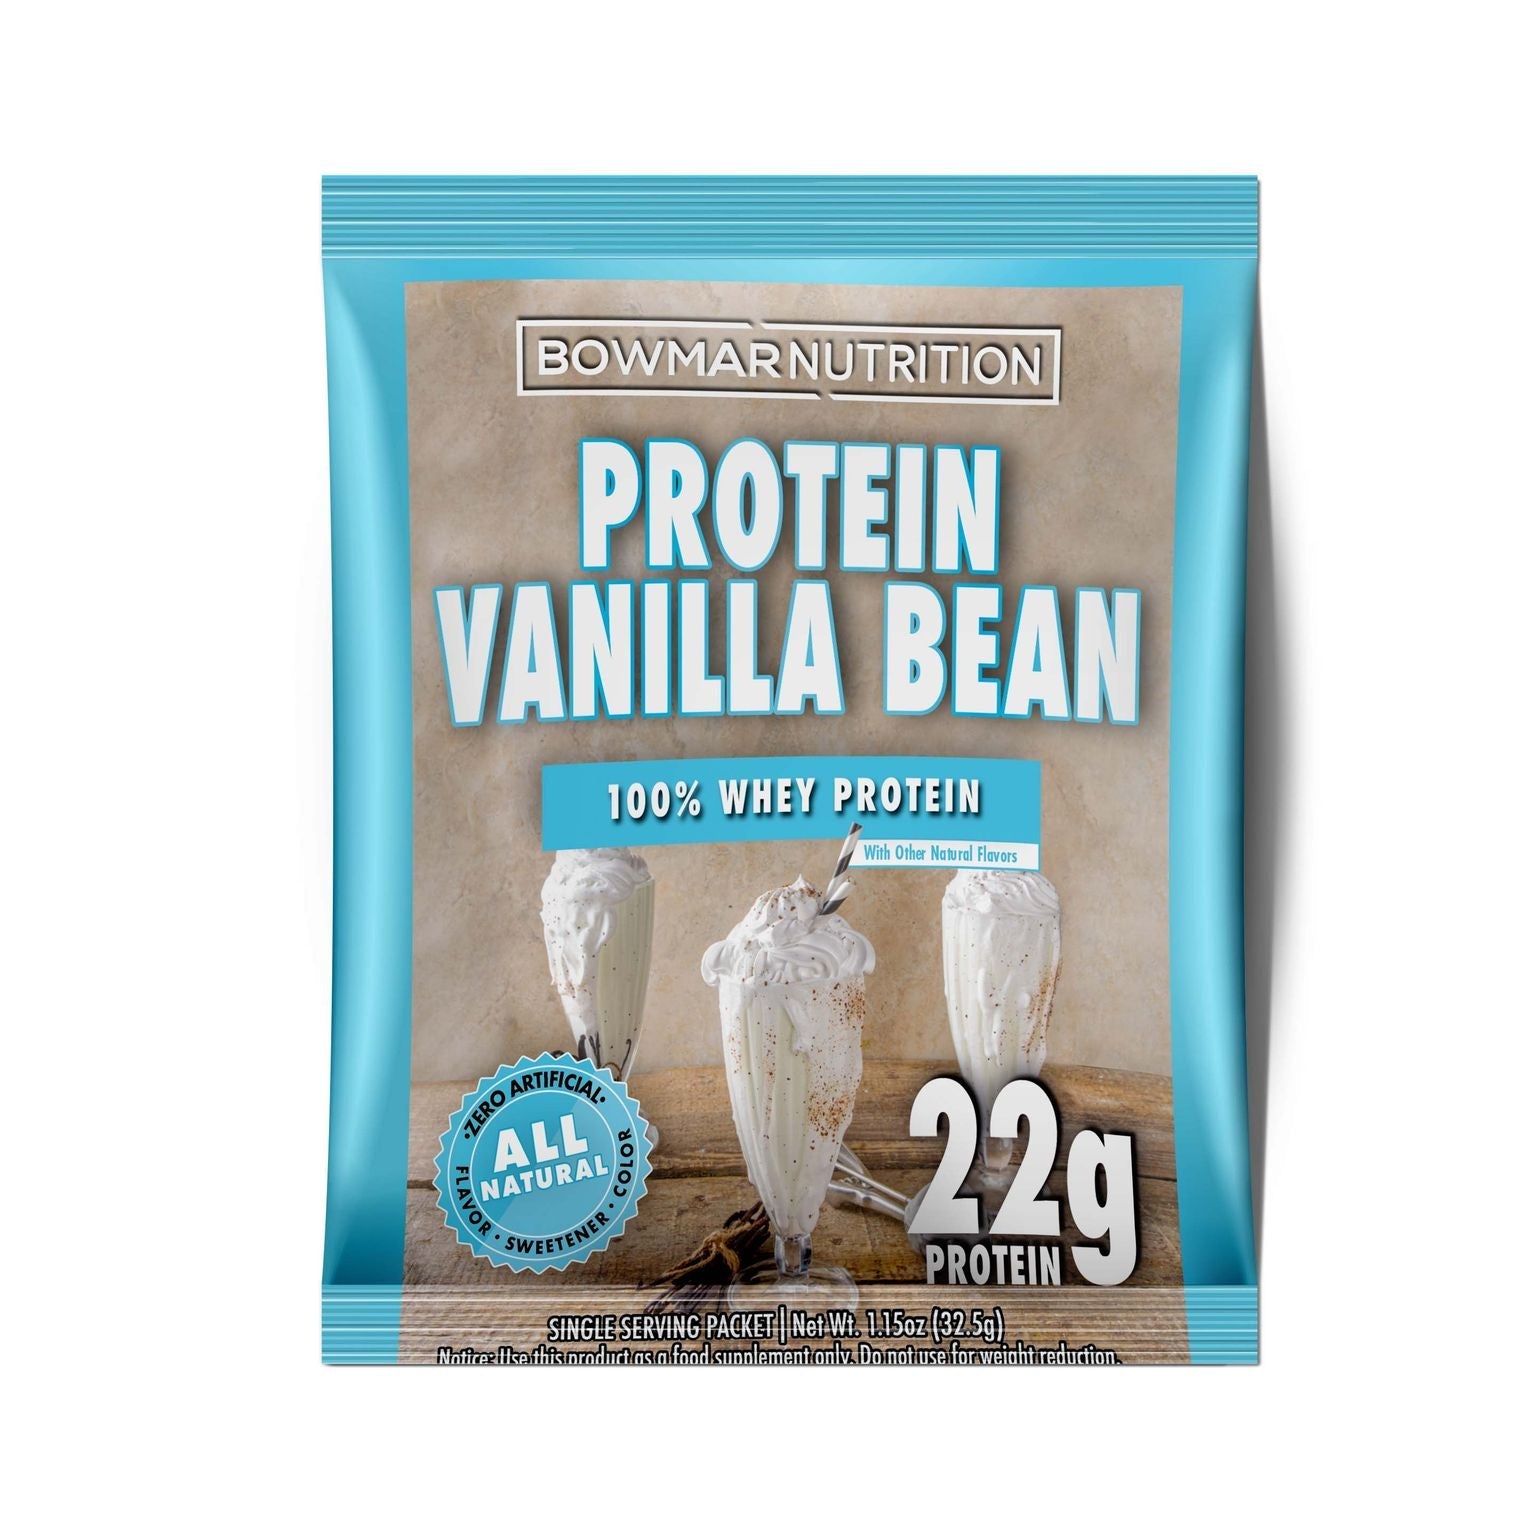 Bowmar Whey Protein Powder Sample (1 serving) Protein Snacks Hot Chocolate,Pumpkin Spice BEST BY 11/2022,Strawberry Shake,Frosted Cookie,Wedding Cake,Cinnamon Roll,Fruity Cereal,Carrot Cake,Cookies & Cream,Hazelnut Coffee,Birthday Cake,Pancakes & Syrup,Mint Chocolate Chip,Blueberry Cheesecake BEST BY 10/2022,Peach Cobbler,S'Mores,Vanilla,LIMITED TIME Pumpkin Hot Chocolate,Chai Tea,Apple Pie Oatmeal,Banana Milkshake bowmar